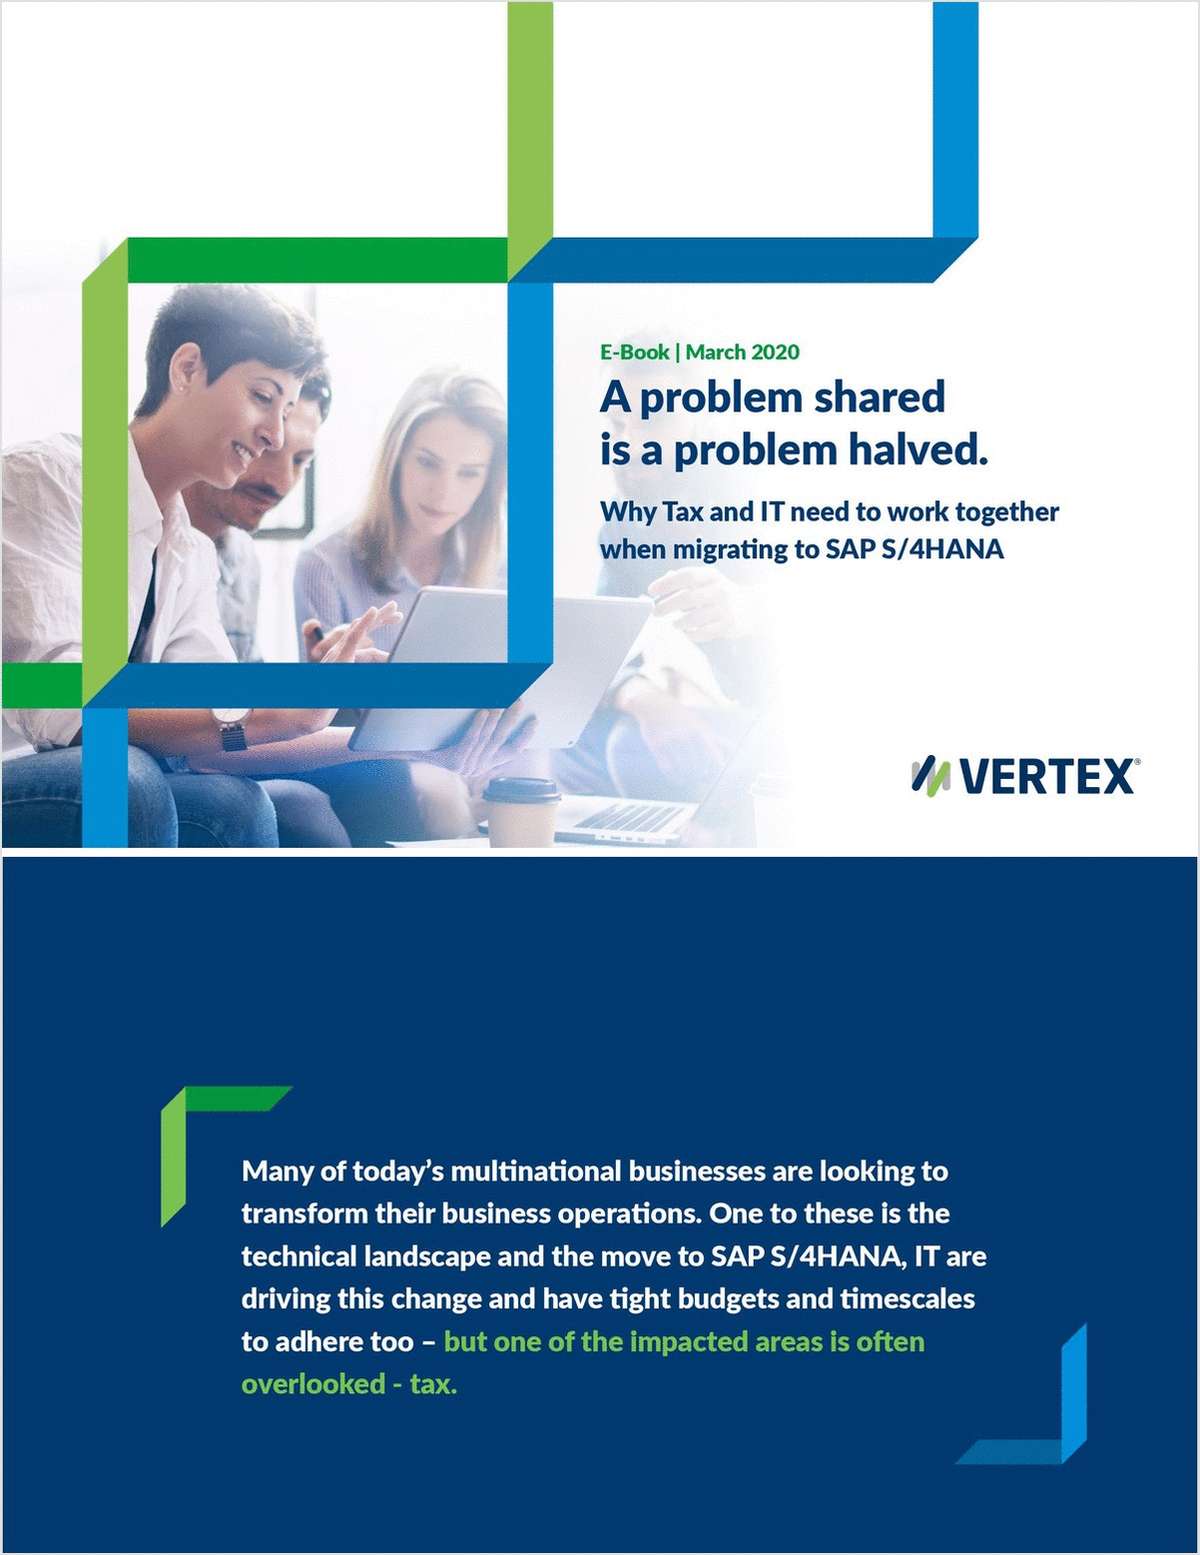 Why Tax and IT need to work together when migrating to SAP S/4HANA